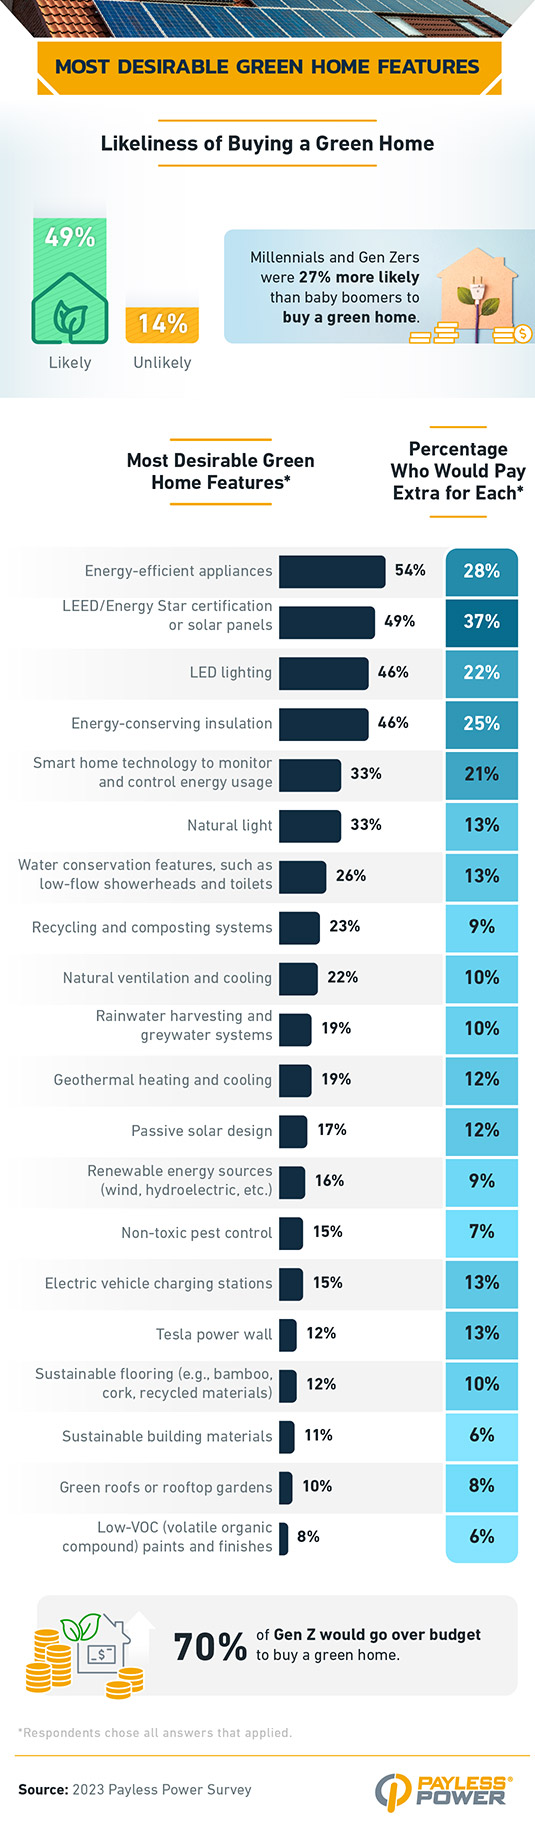 Infographic that explores the most desirable green home features according to survey respondents.